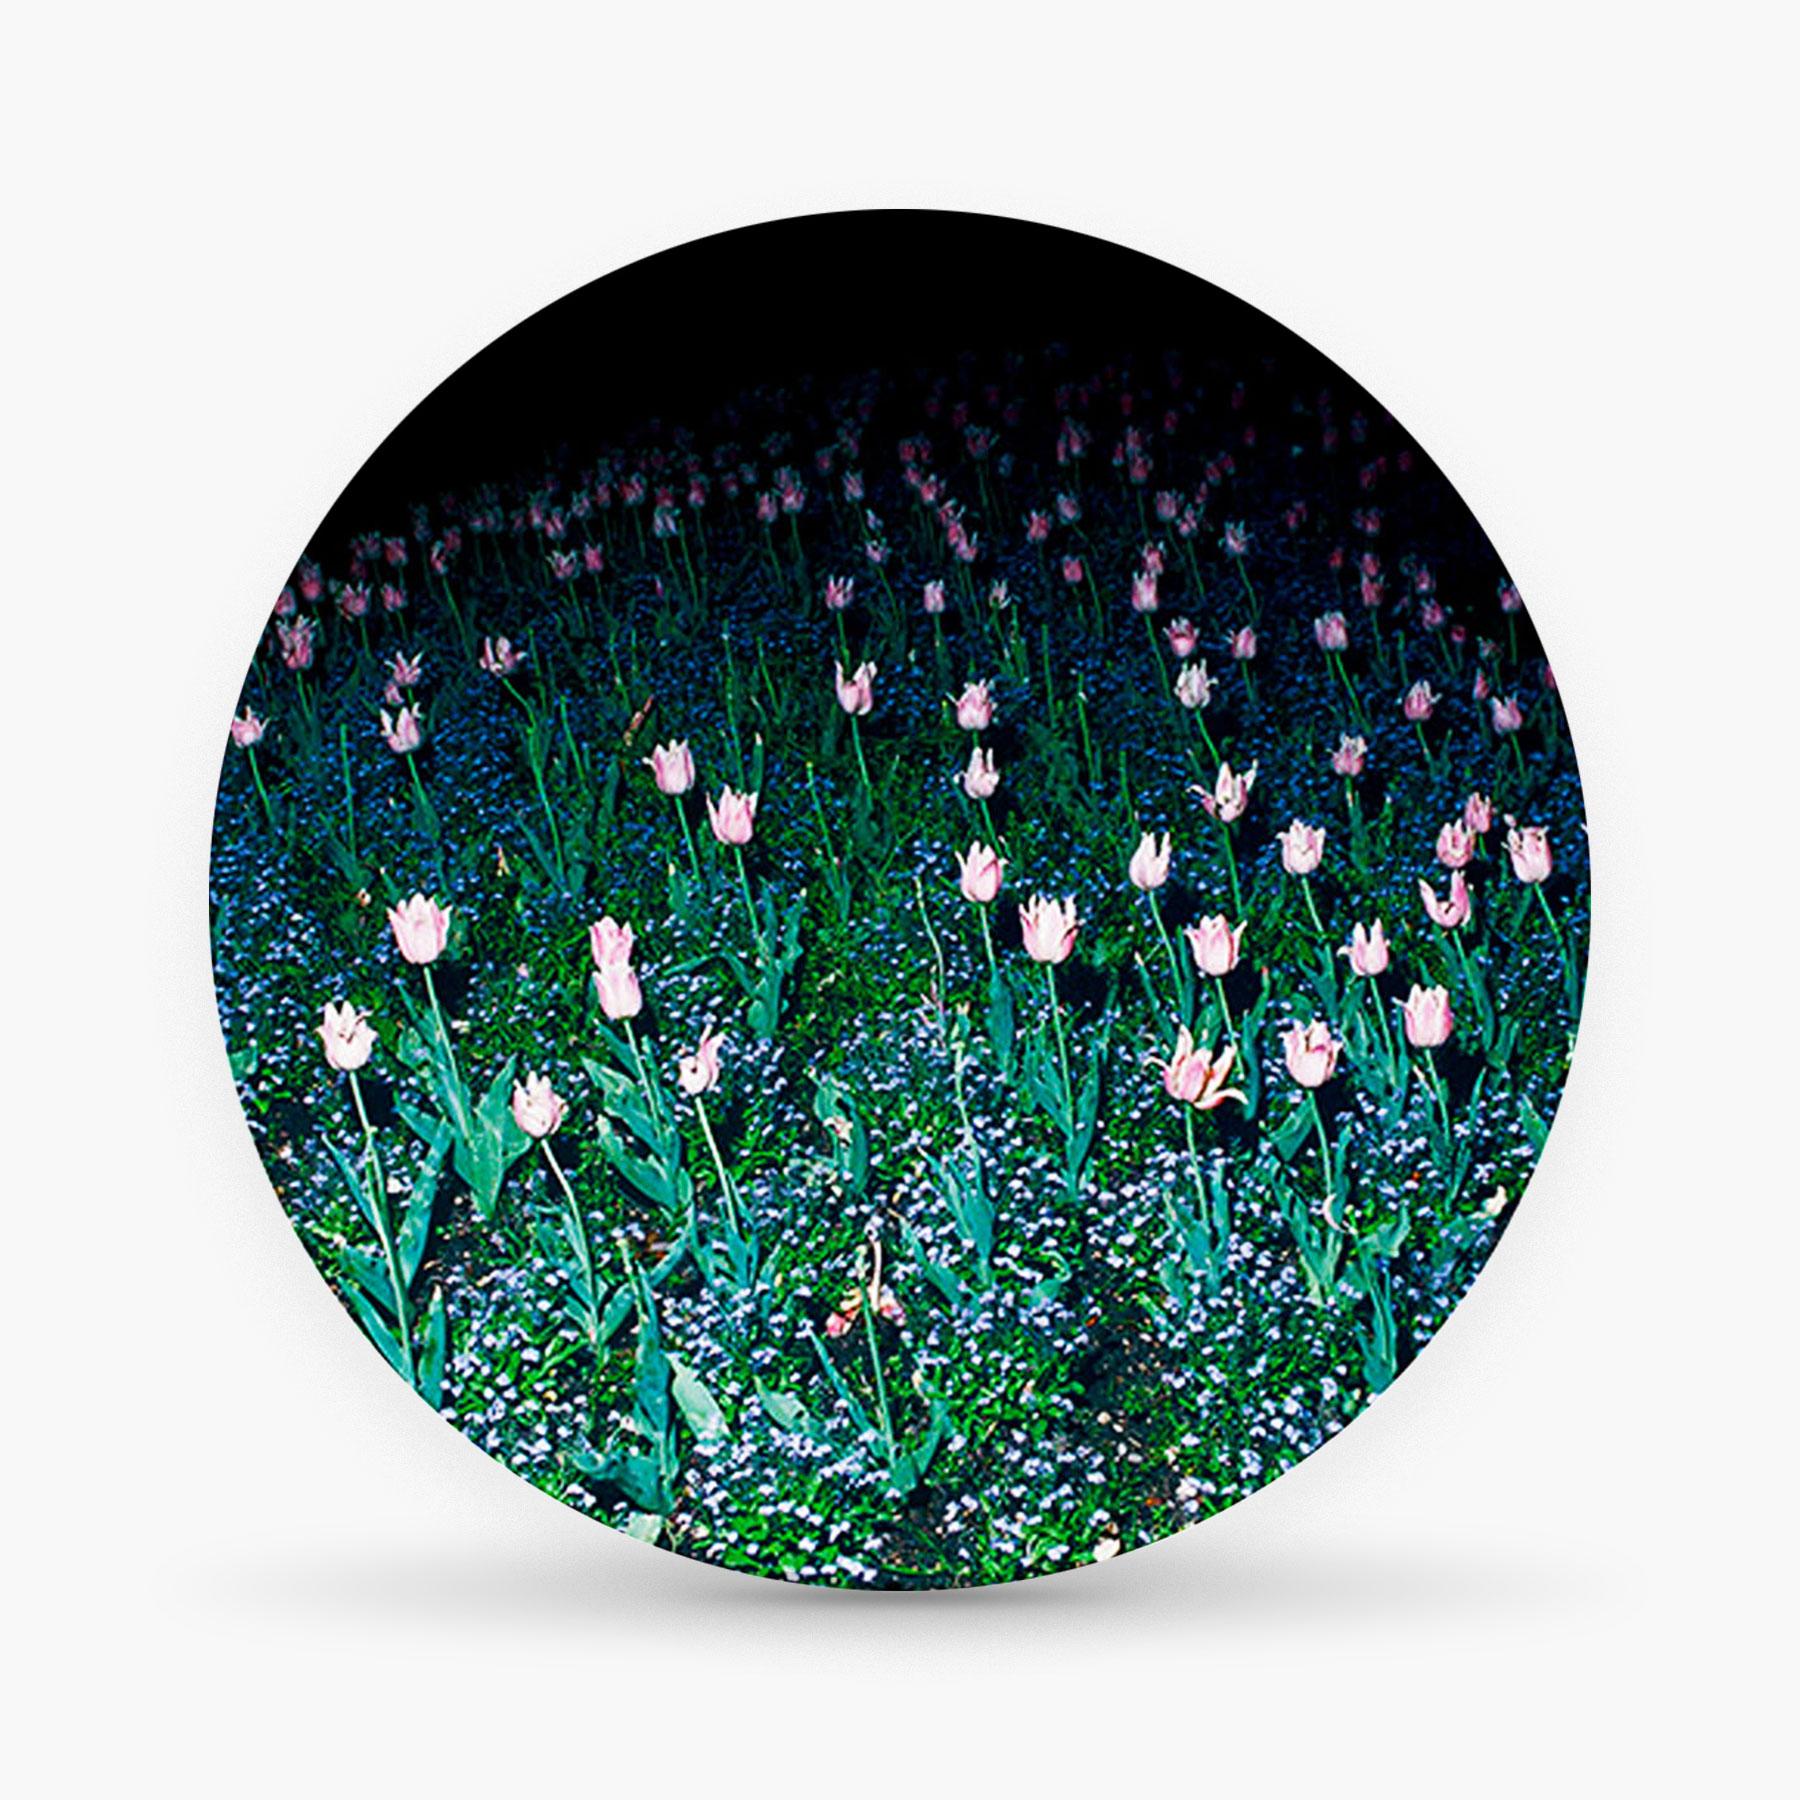 Charles Petit is an urban poet photographer. Here a square flashed at night Rue de Paradis in the years 70. An electric way to see the garden at night.

Porcelain of Limoges extra fine.
Colors serigraphy.
Diameter: 16 cm 
Height: 1.4 cm
Weight: